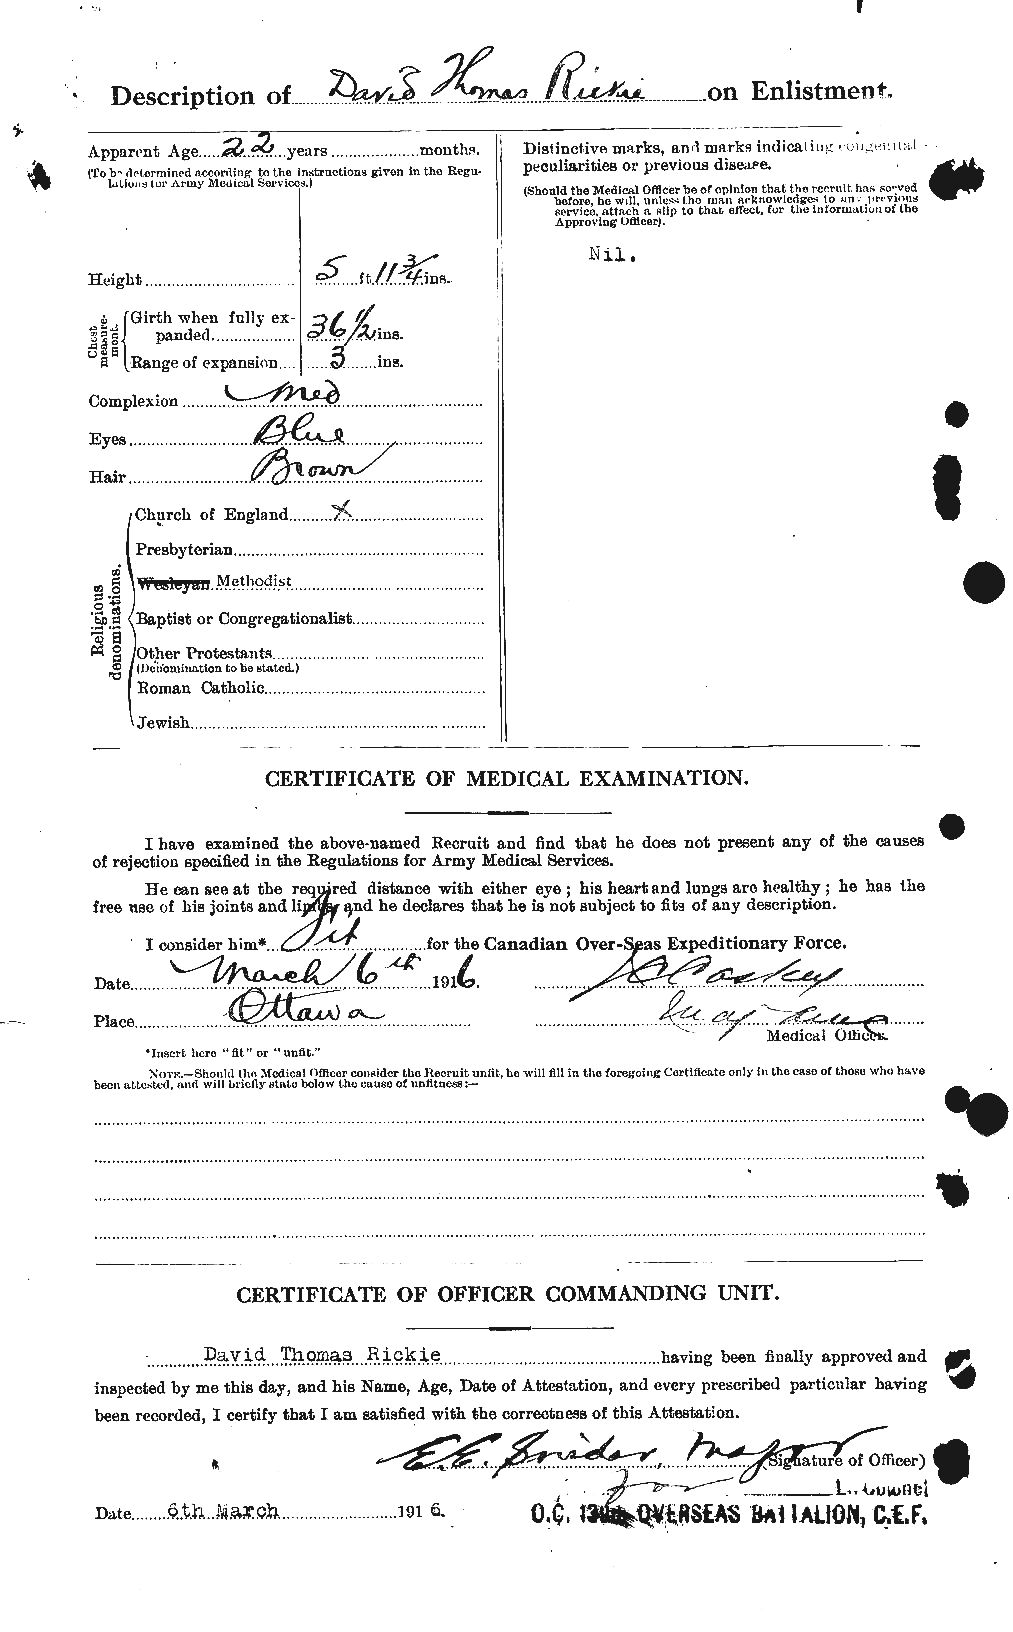 Personnel Records of the First World War - CEF 603062b